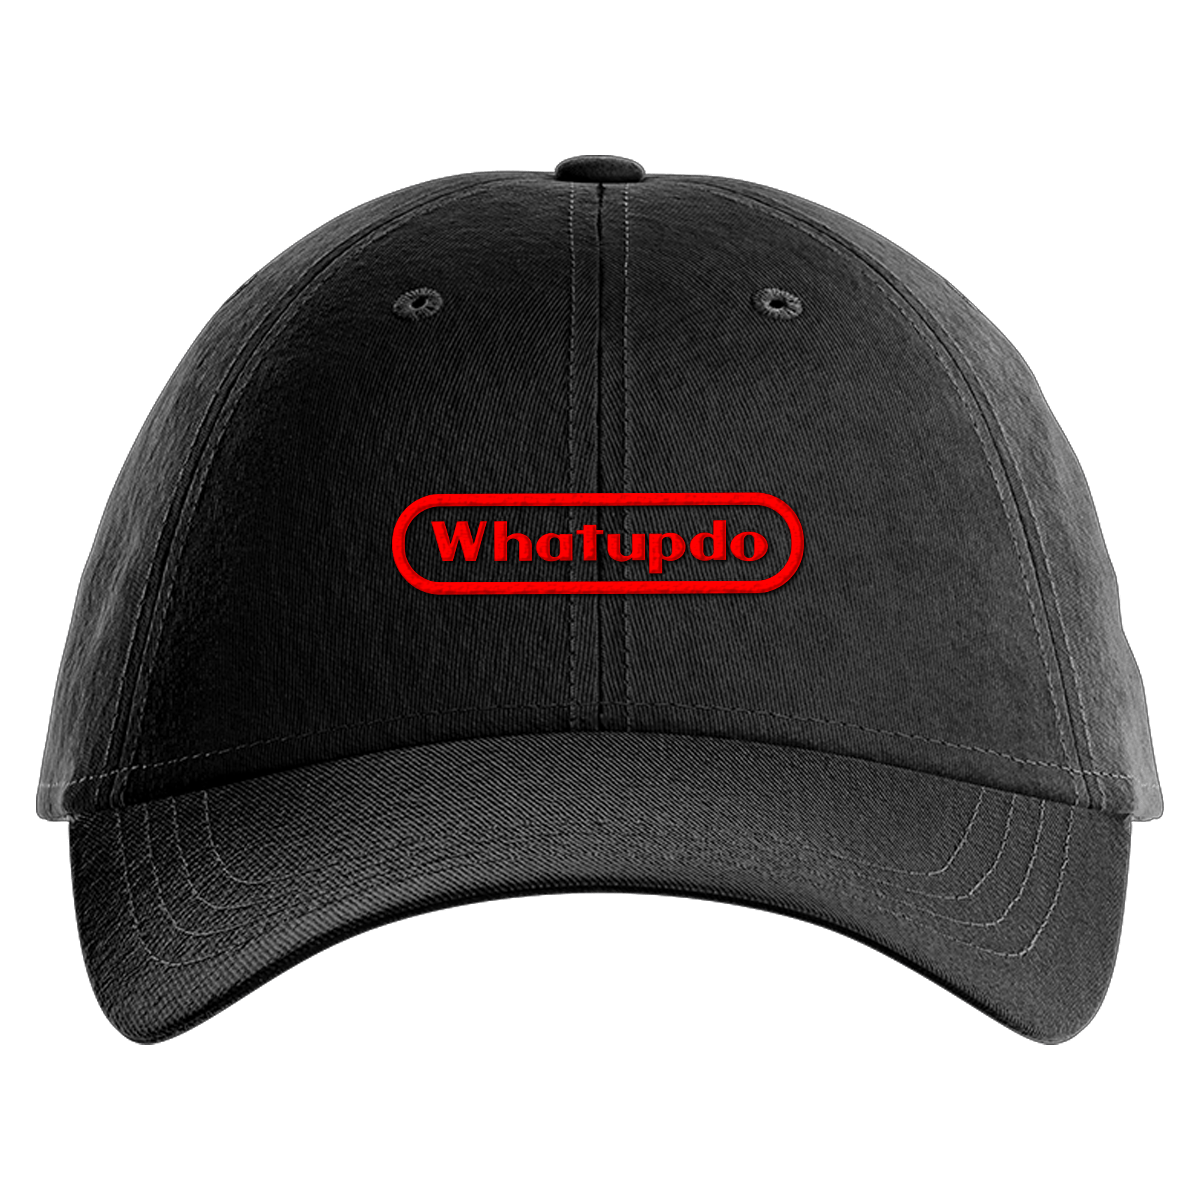 Thumbnail for Whatupdo Embroidered Dad Hat - Greater Half